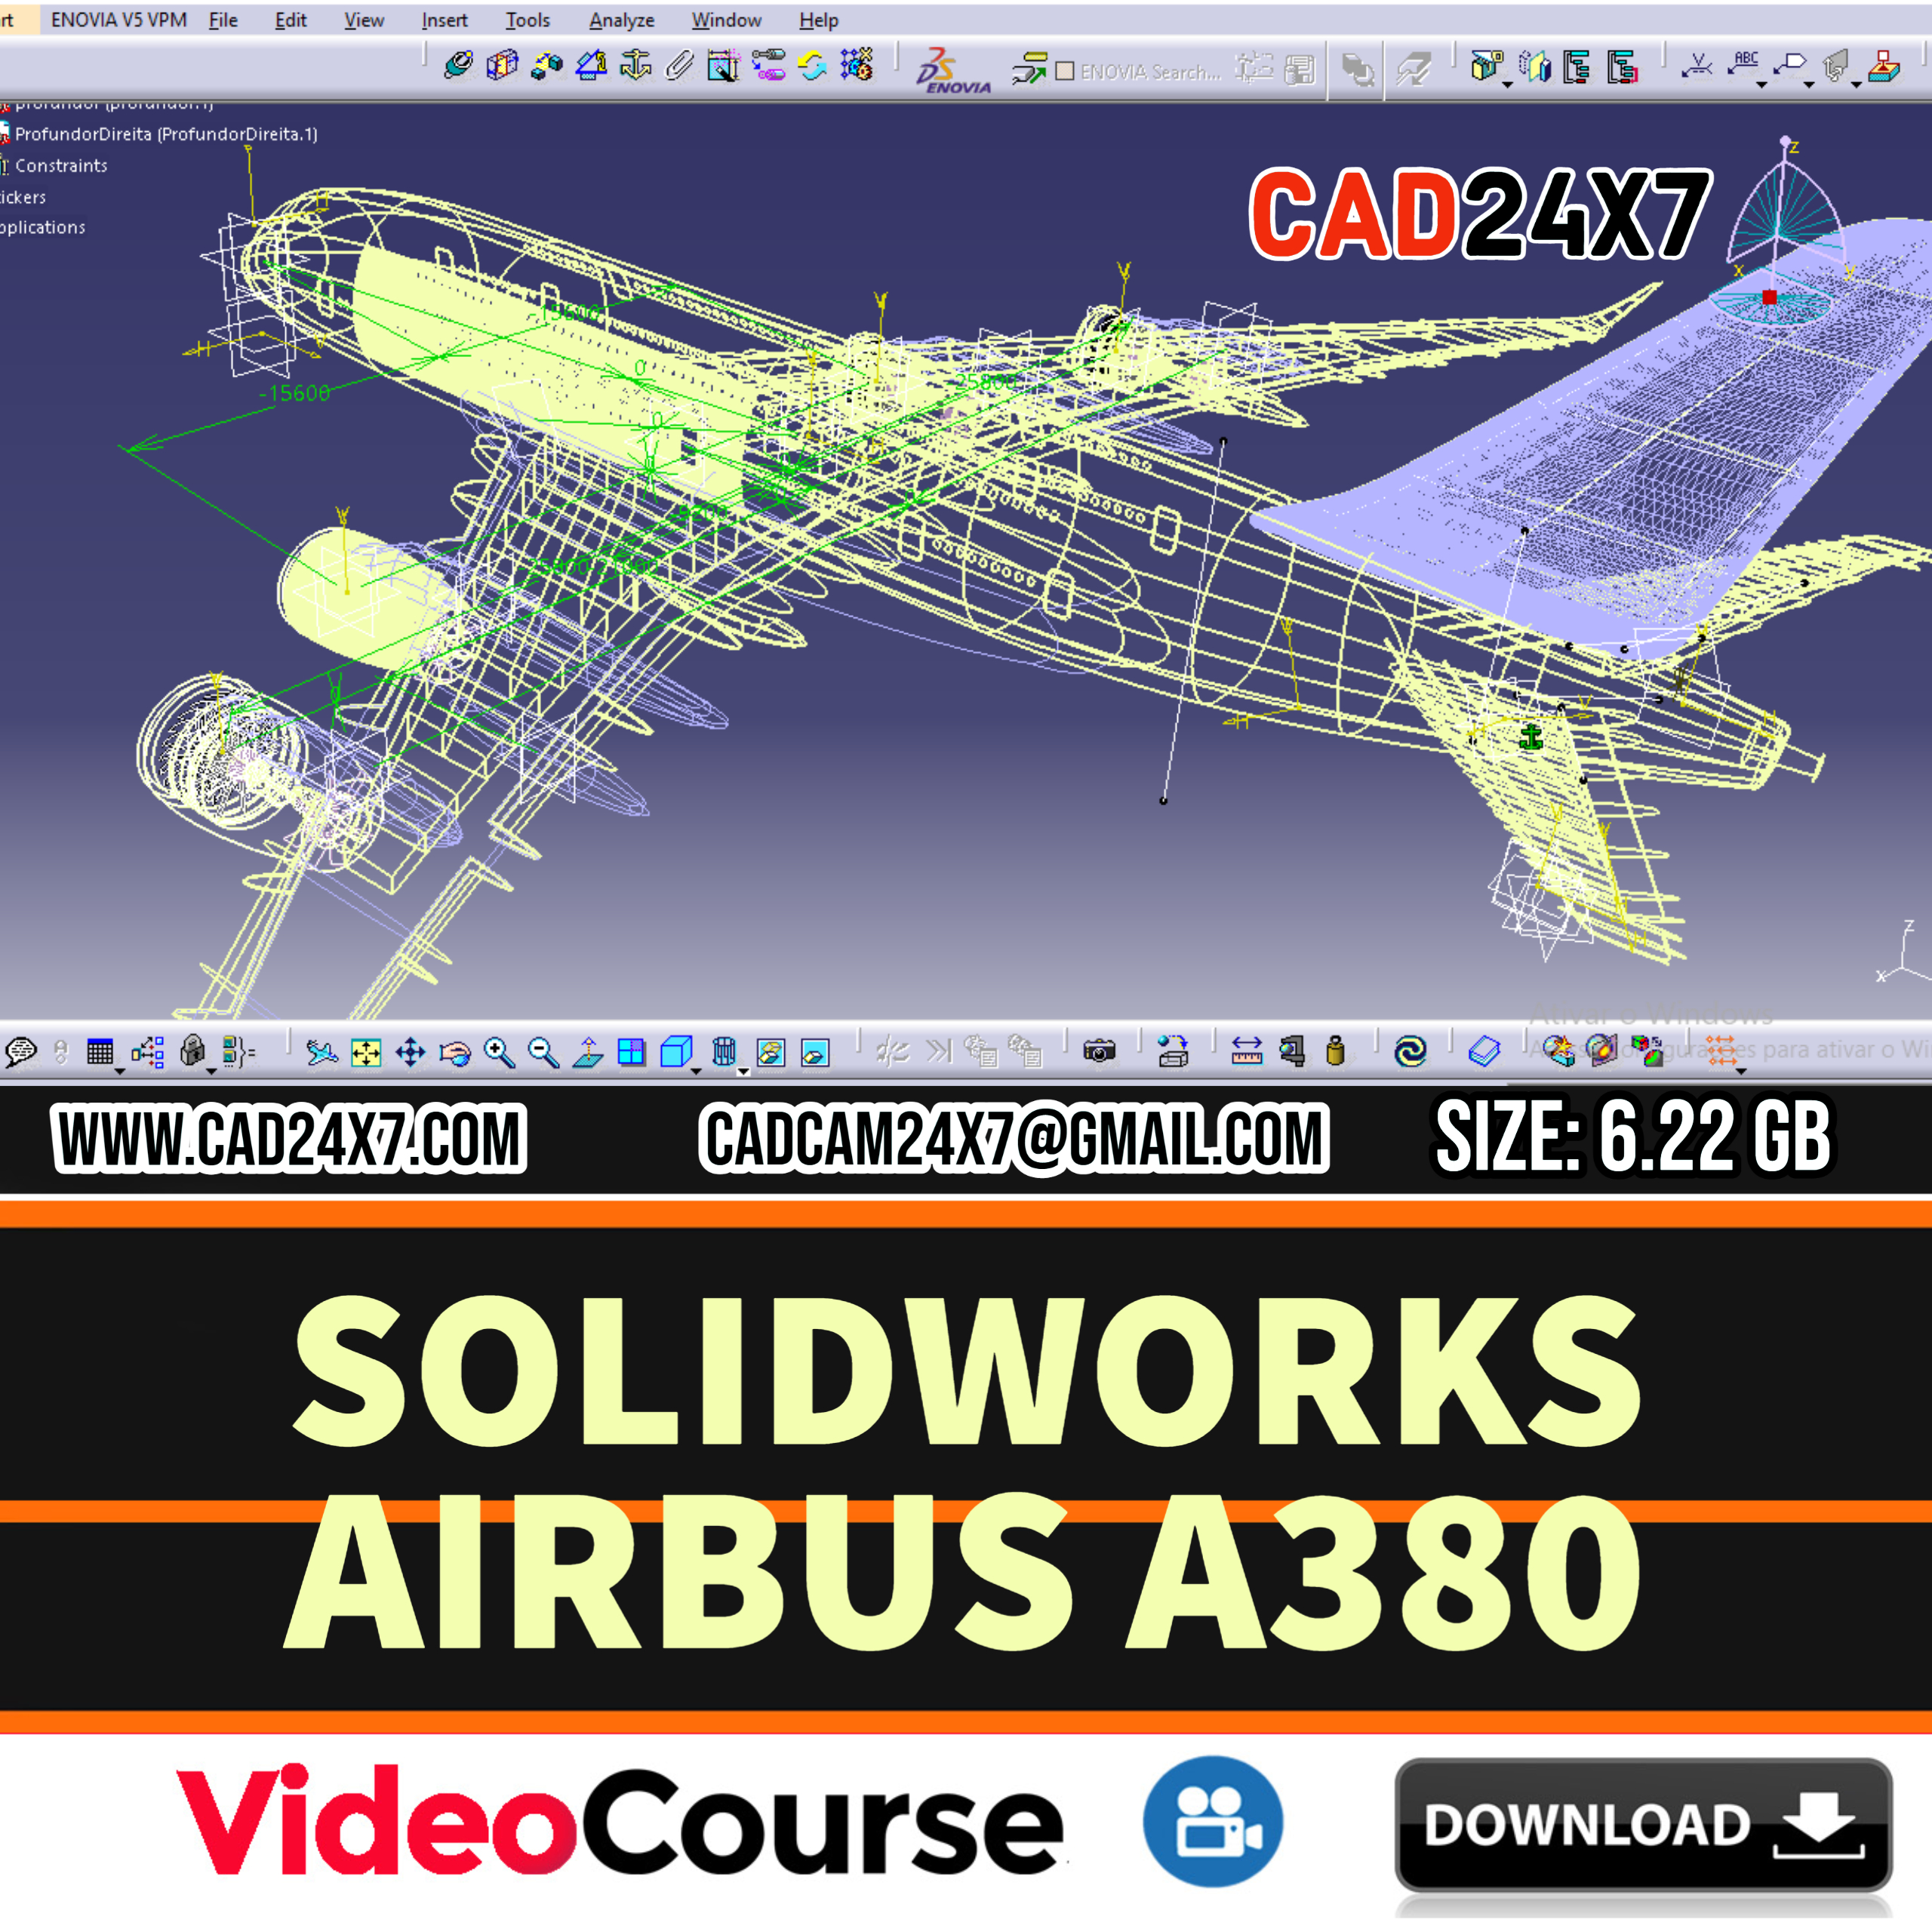 Solidworks Airbus A380